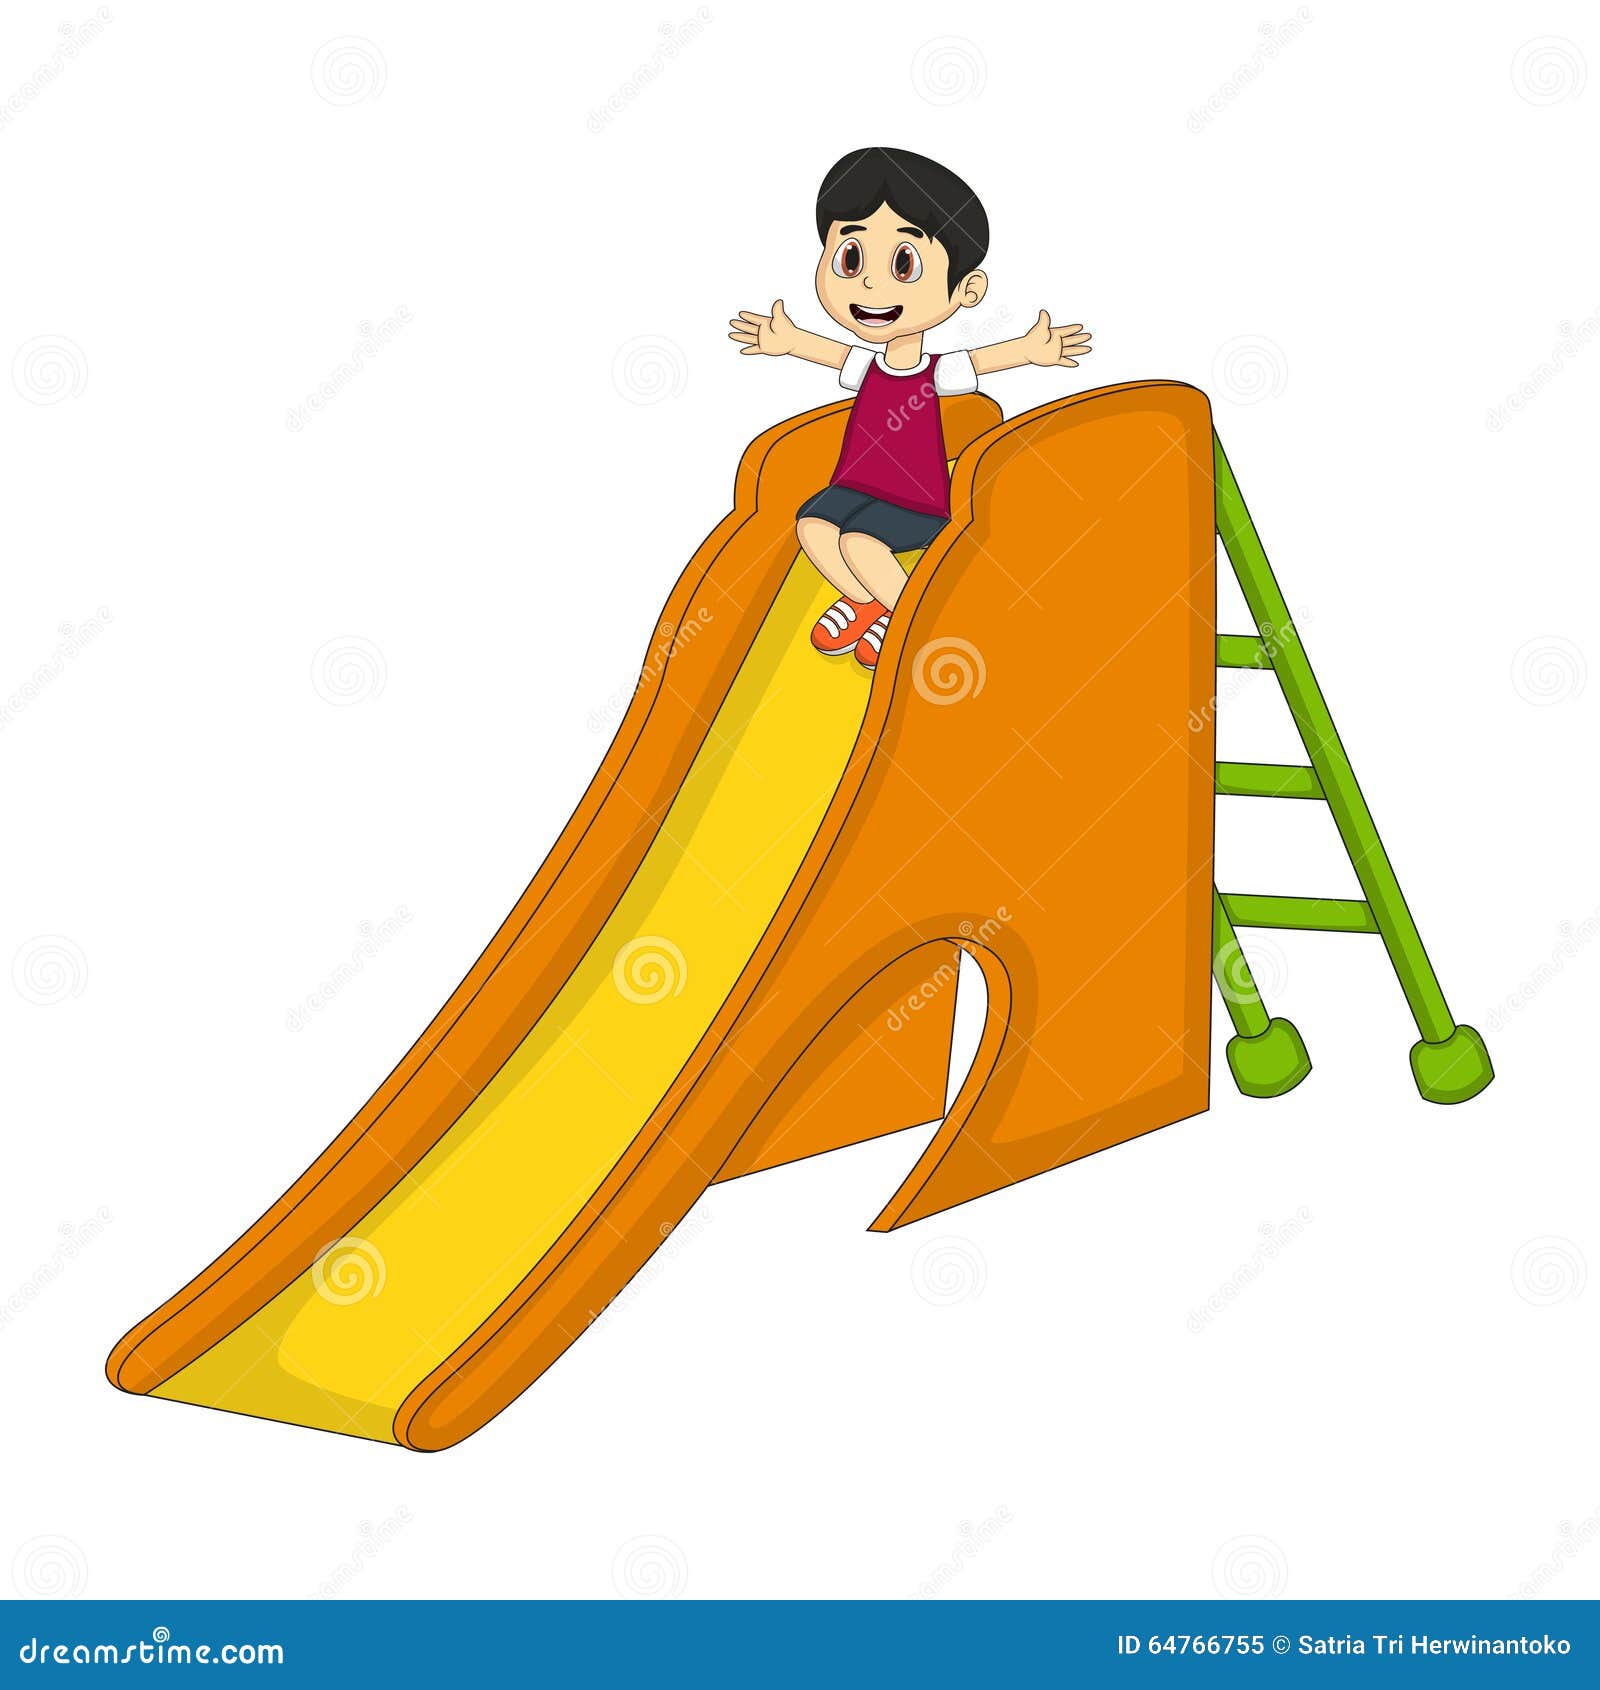 Little Boy Playing on a Slide Cartoon Stock Vector - Illustration of park,  clip: 64766755